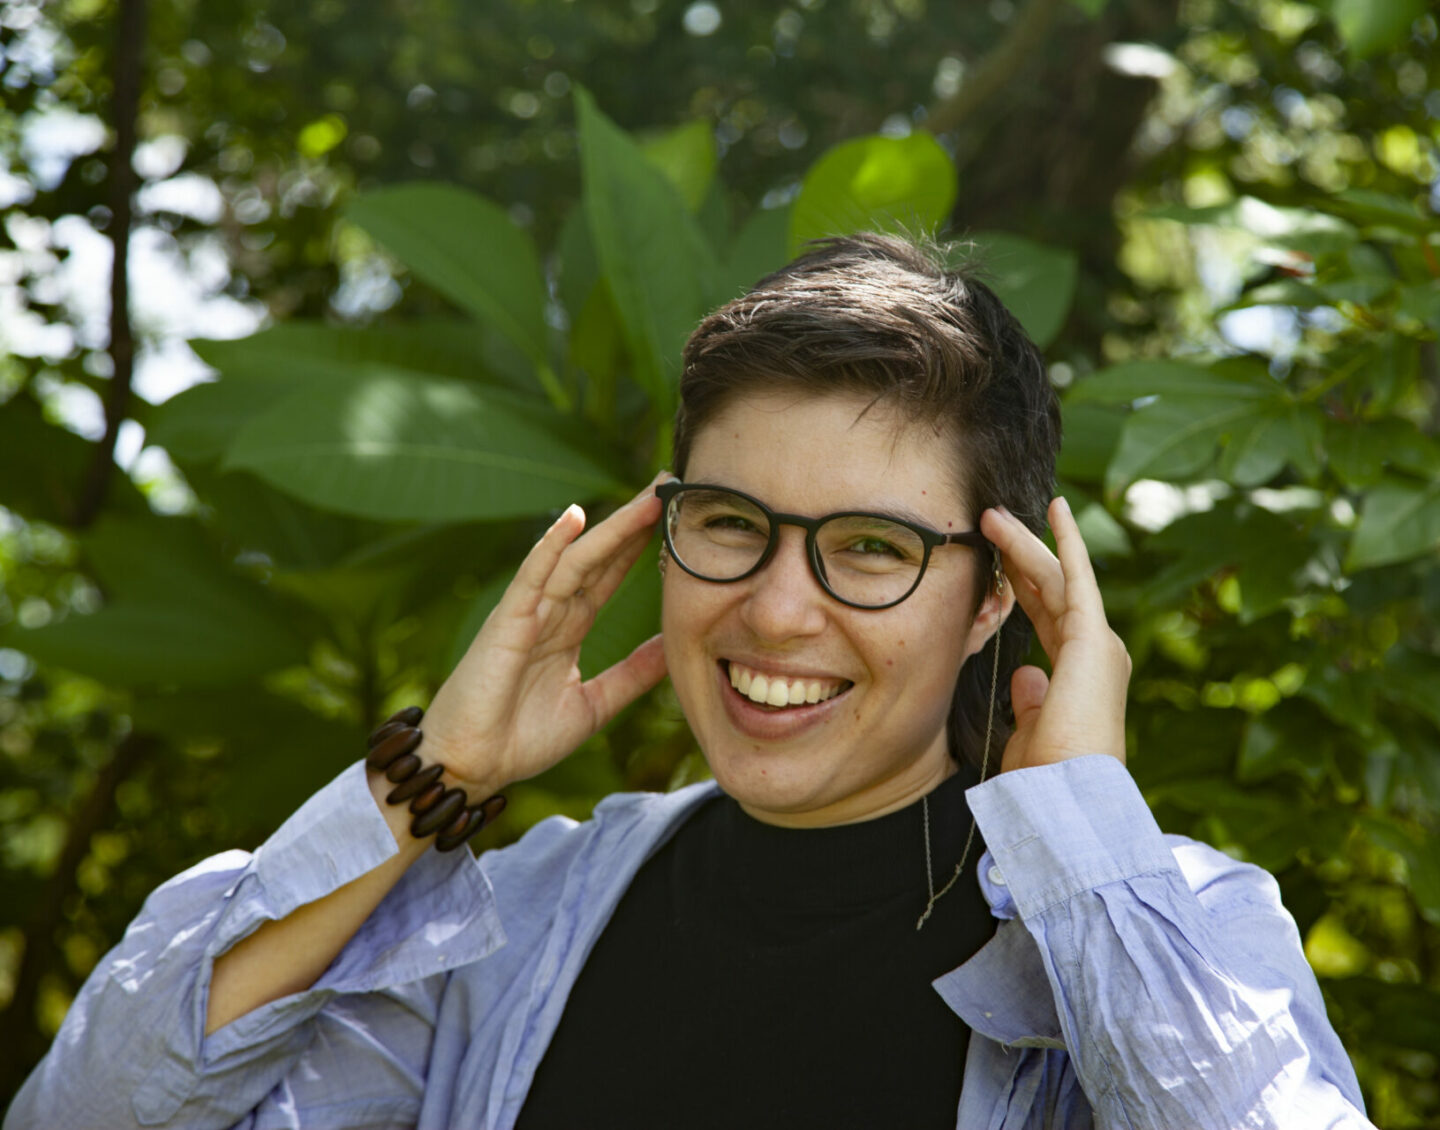 A person with short brown hair smiles and touches both hands to their dark-rimmed glasses, against a backdrop of green plants